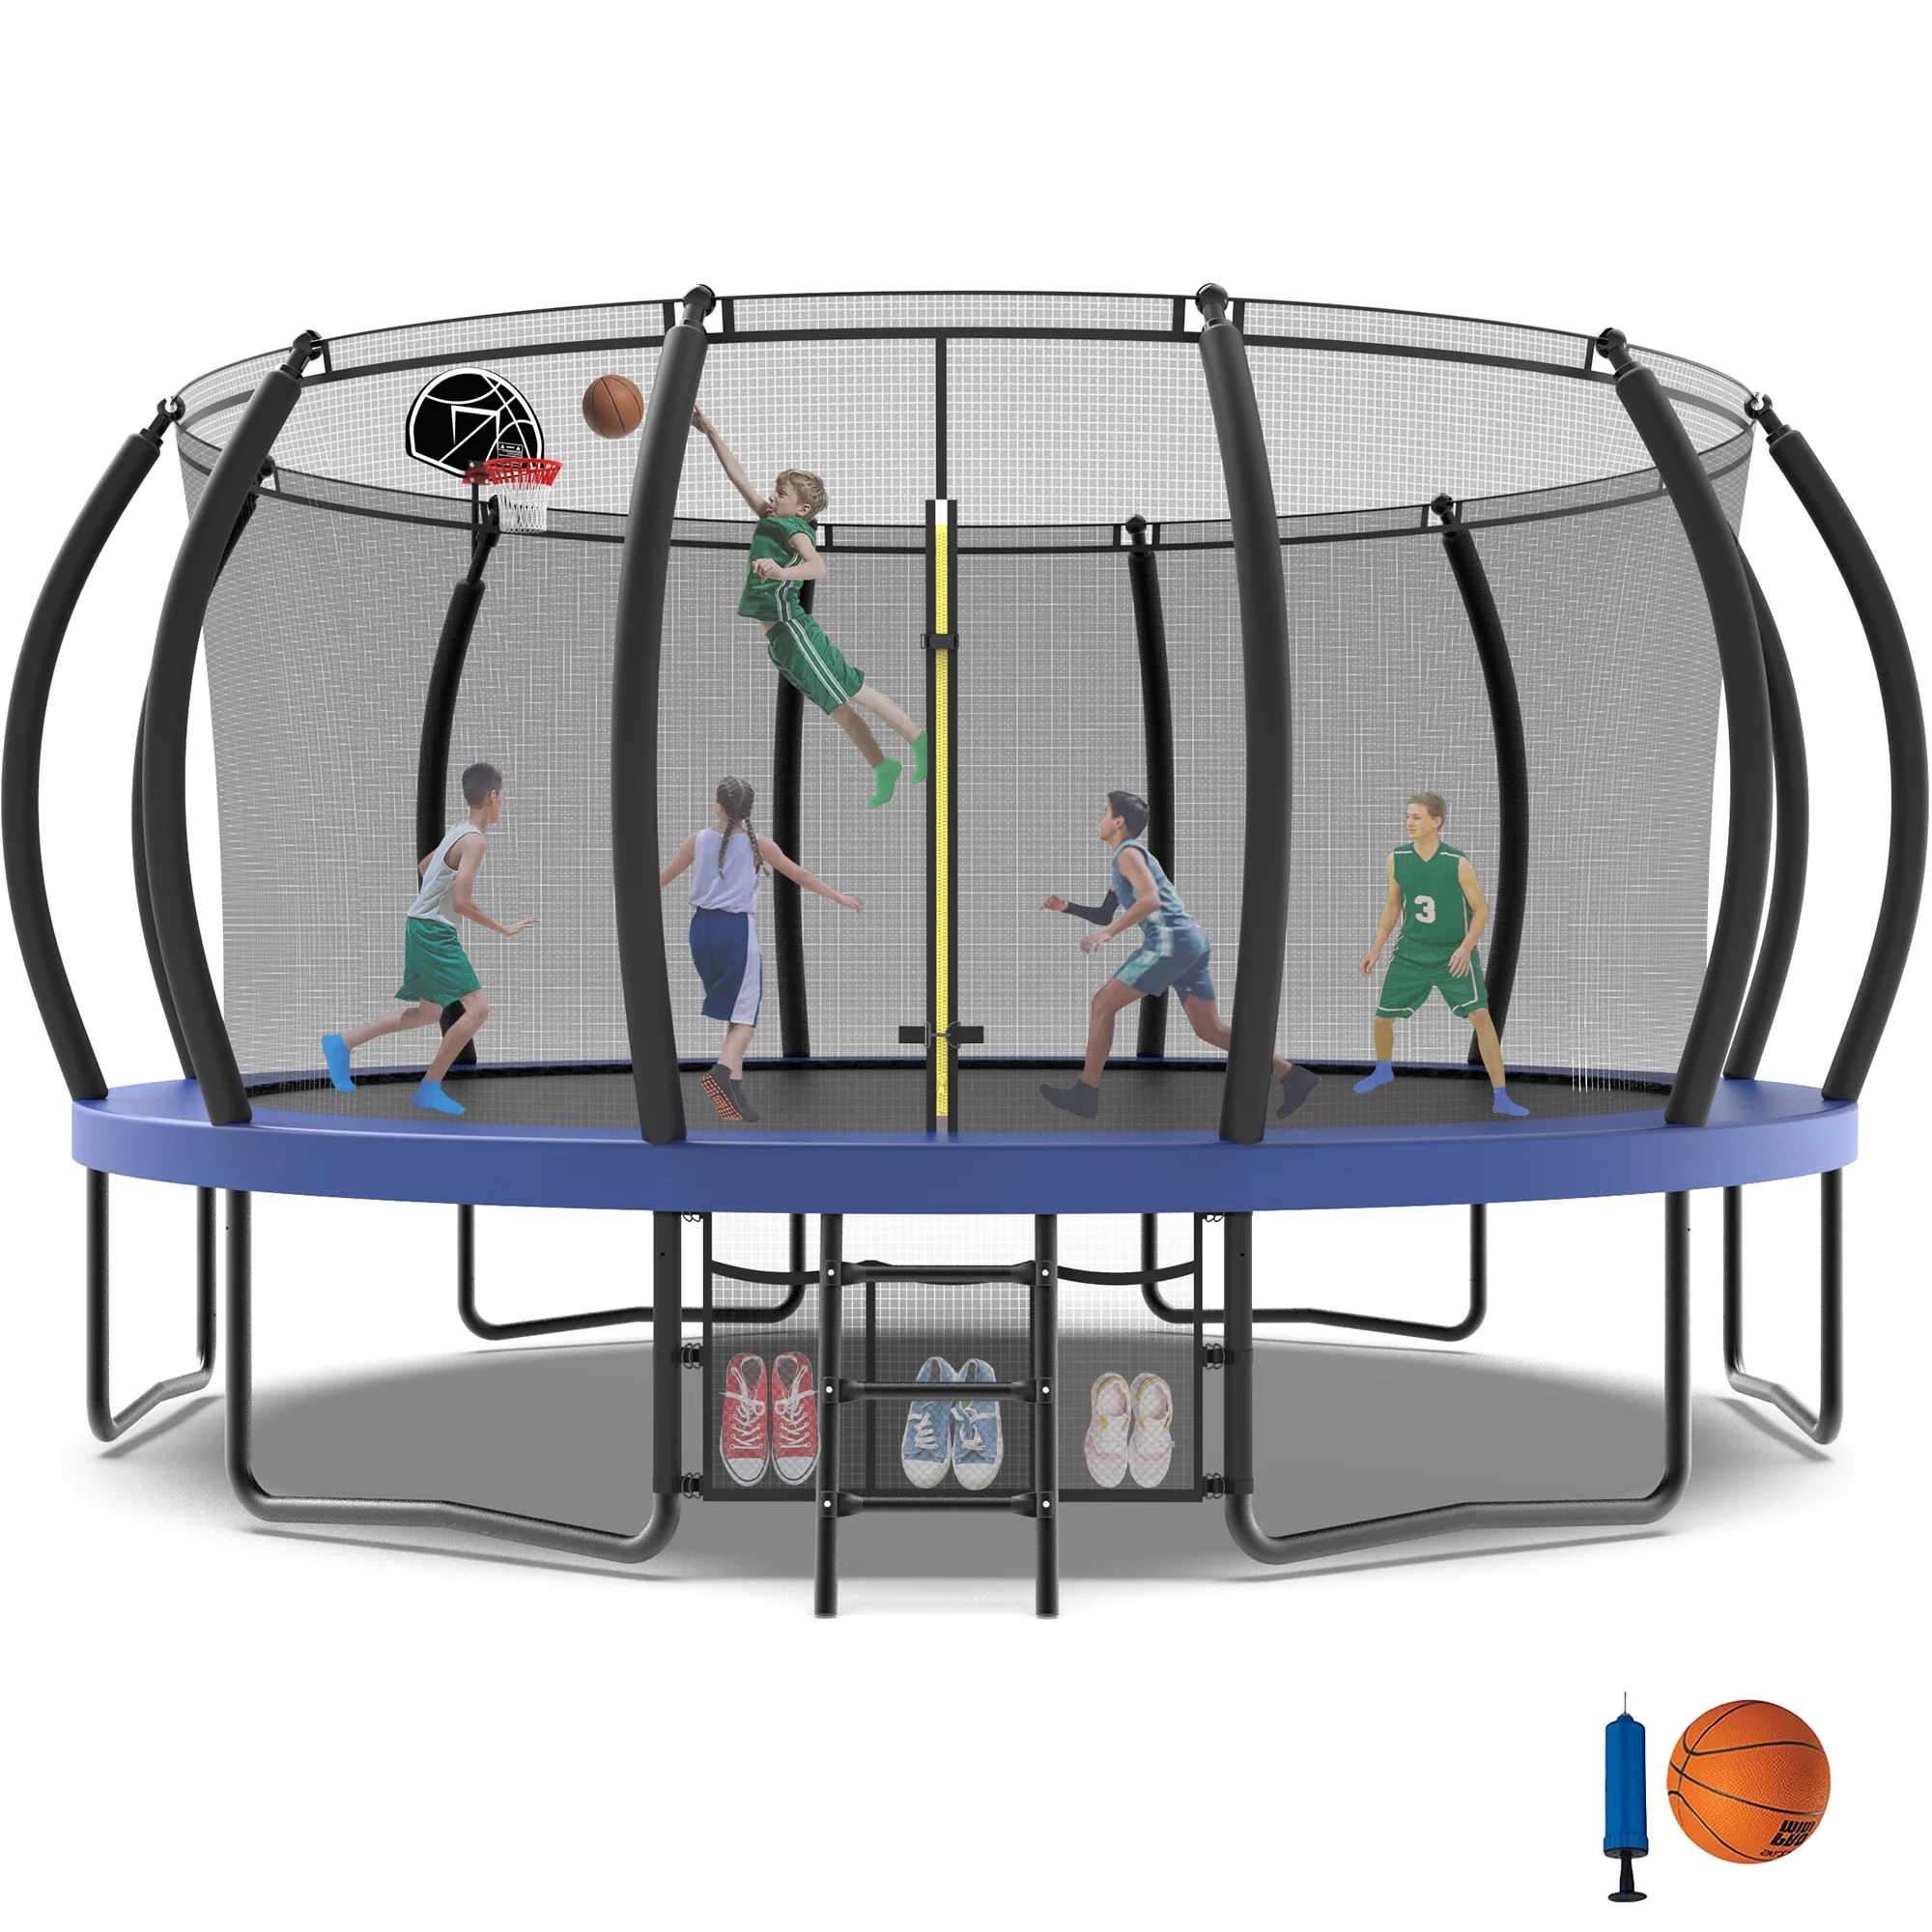 Jump Into Fun Trampoline 16FT, 1500LBS Trampoline for Adults/ 8-10 Kids, Trampoline with Enclosure, Basketball Hoop, Shoes Bags, Galvanized Full Spray Round Outdoor Trampoline with Curve Pole